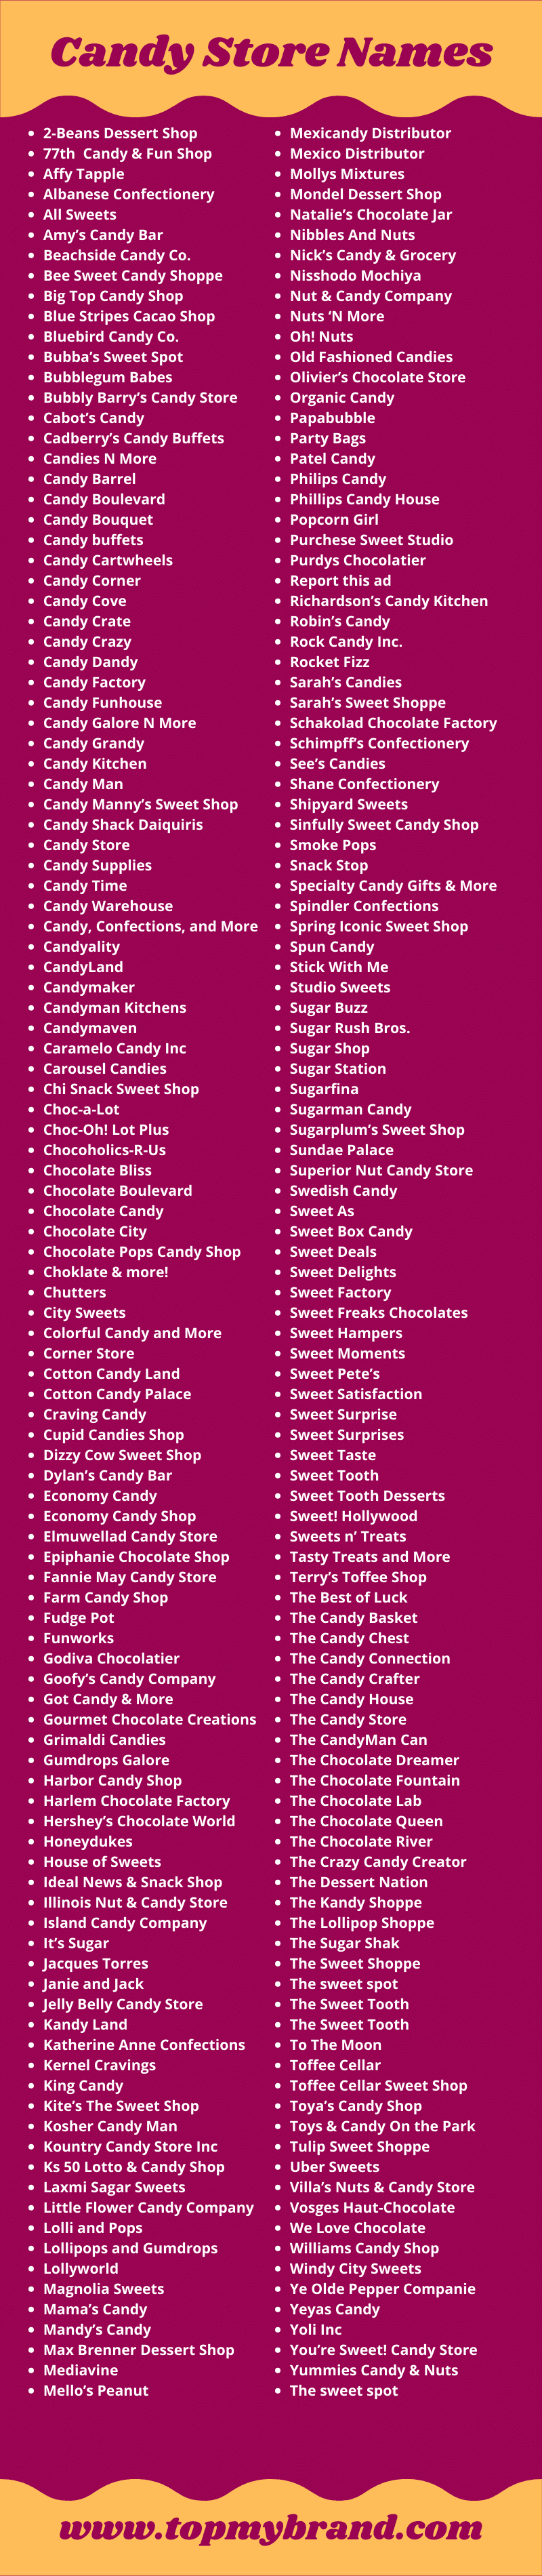 220+ Good Candy Store Names (2022) - TopMyBrand